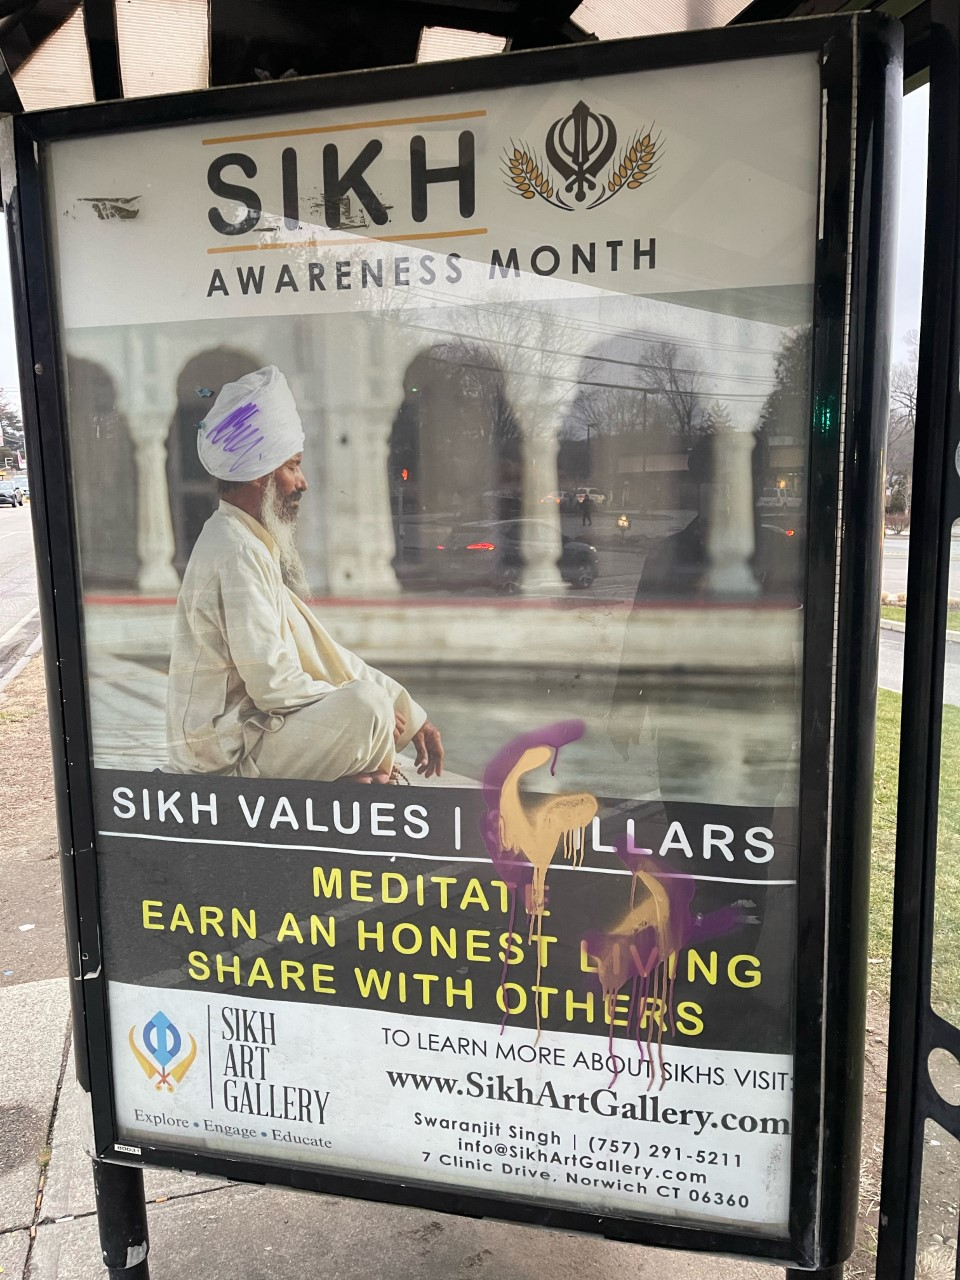 An advertisement placed at a local bus station shows graffiti used to deface the billboard, which was placed by City Council member Swaranjit Singh. Singh told The Bulletin he has long placed the advertisements and other bus stations around the city remained untouched but wondered if his recent election to city council made him a target.